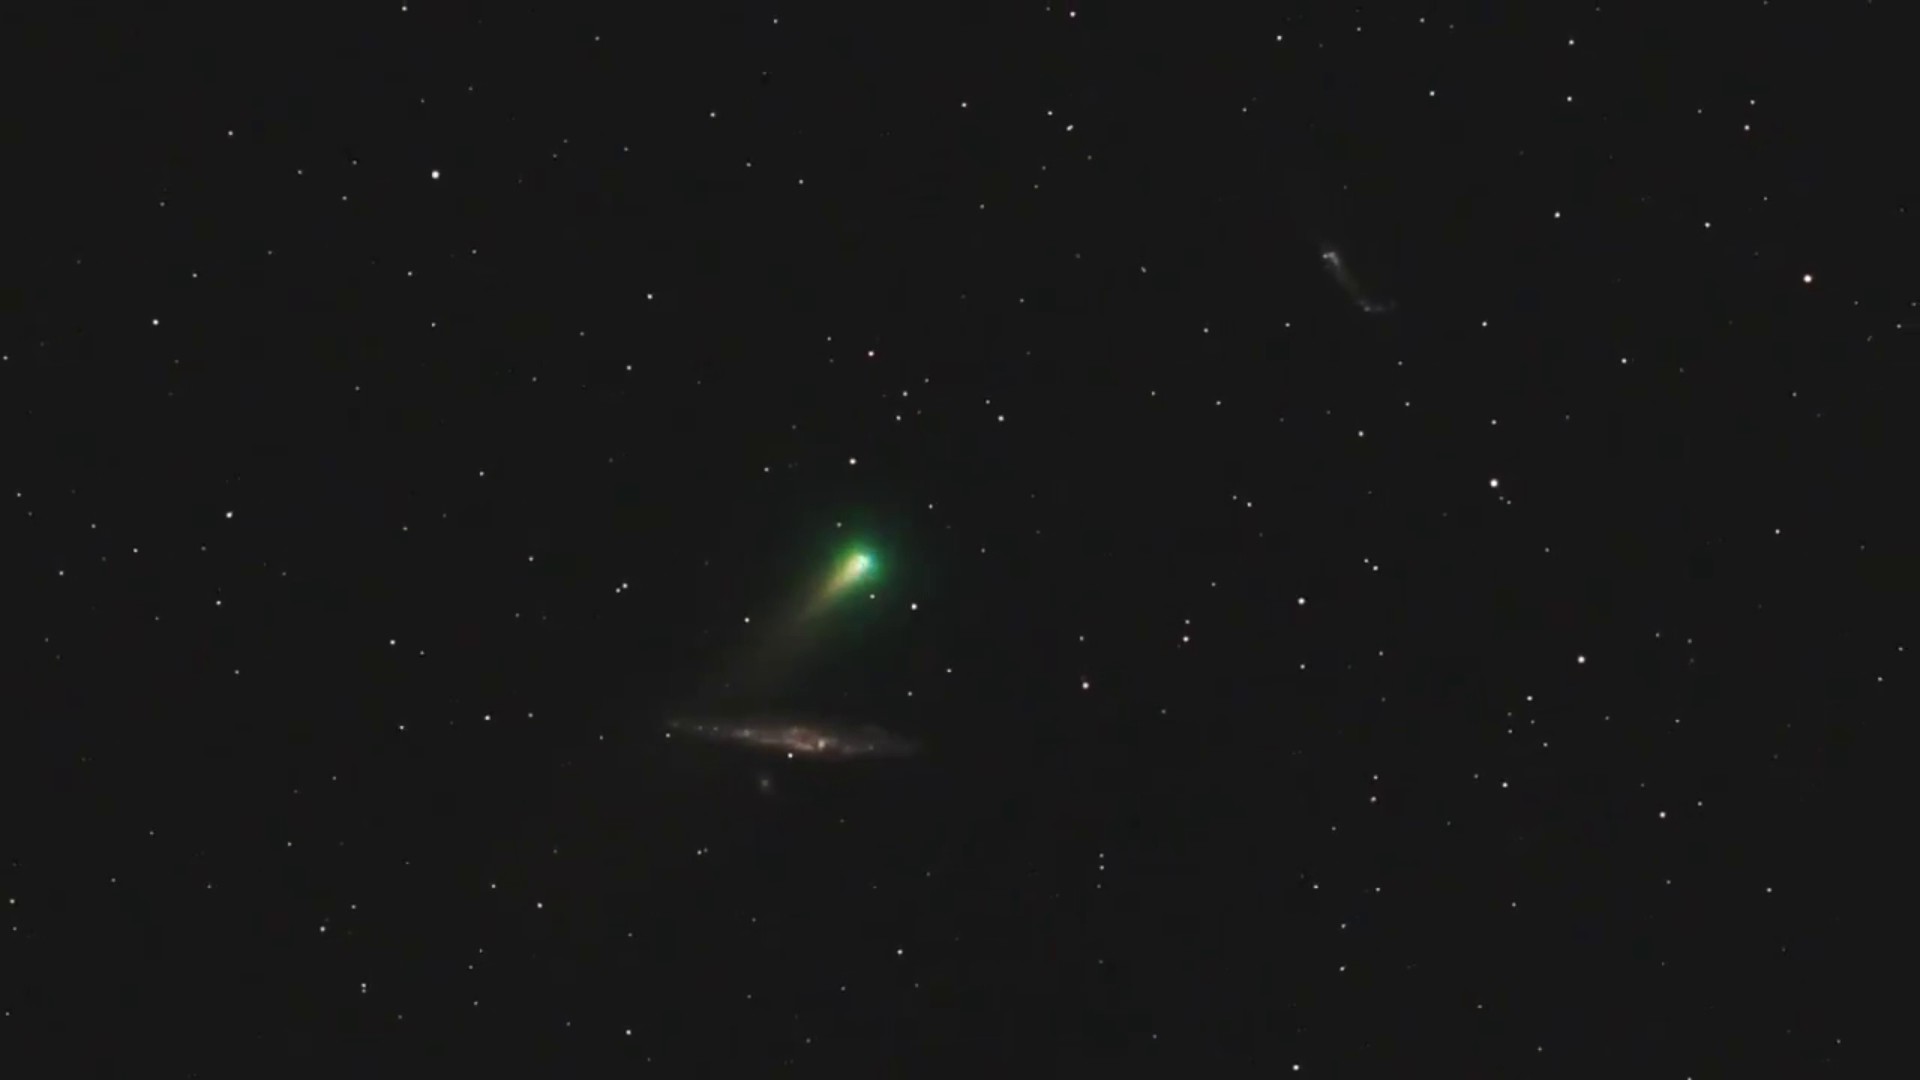 Founding astronomer tells 10 News when, where and how to see Decembers comet Leonard